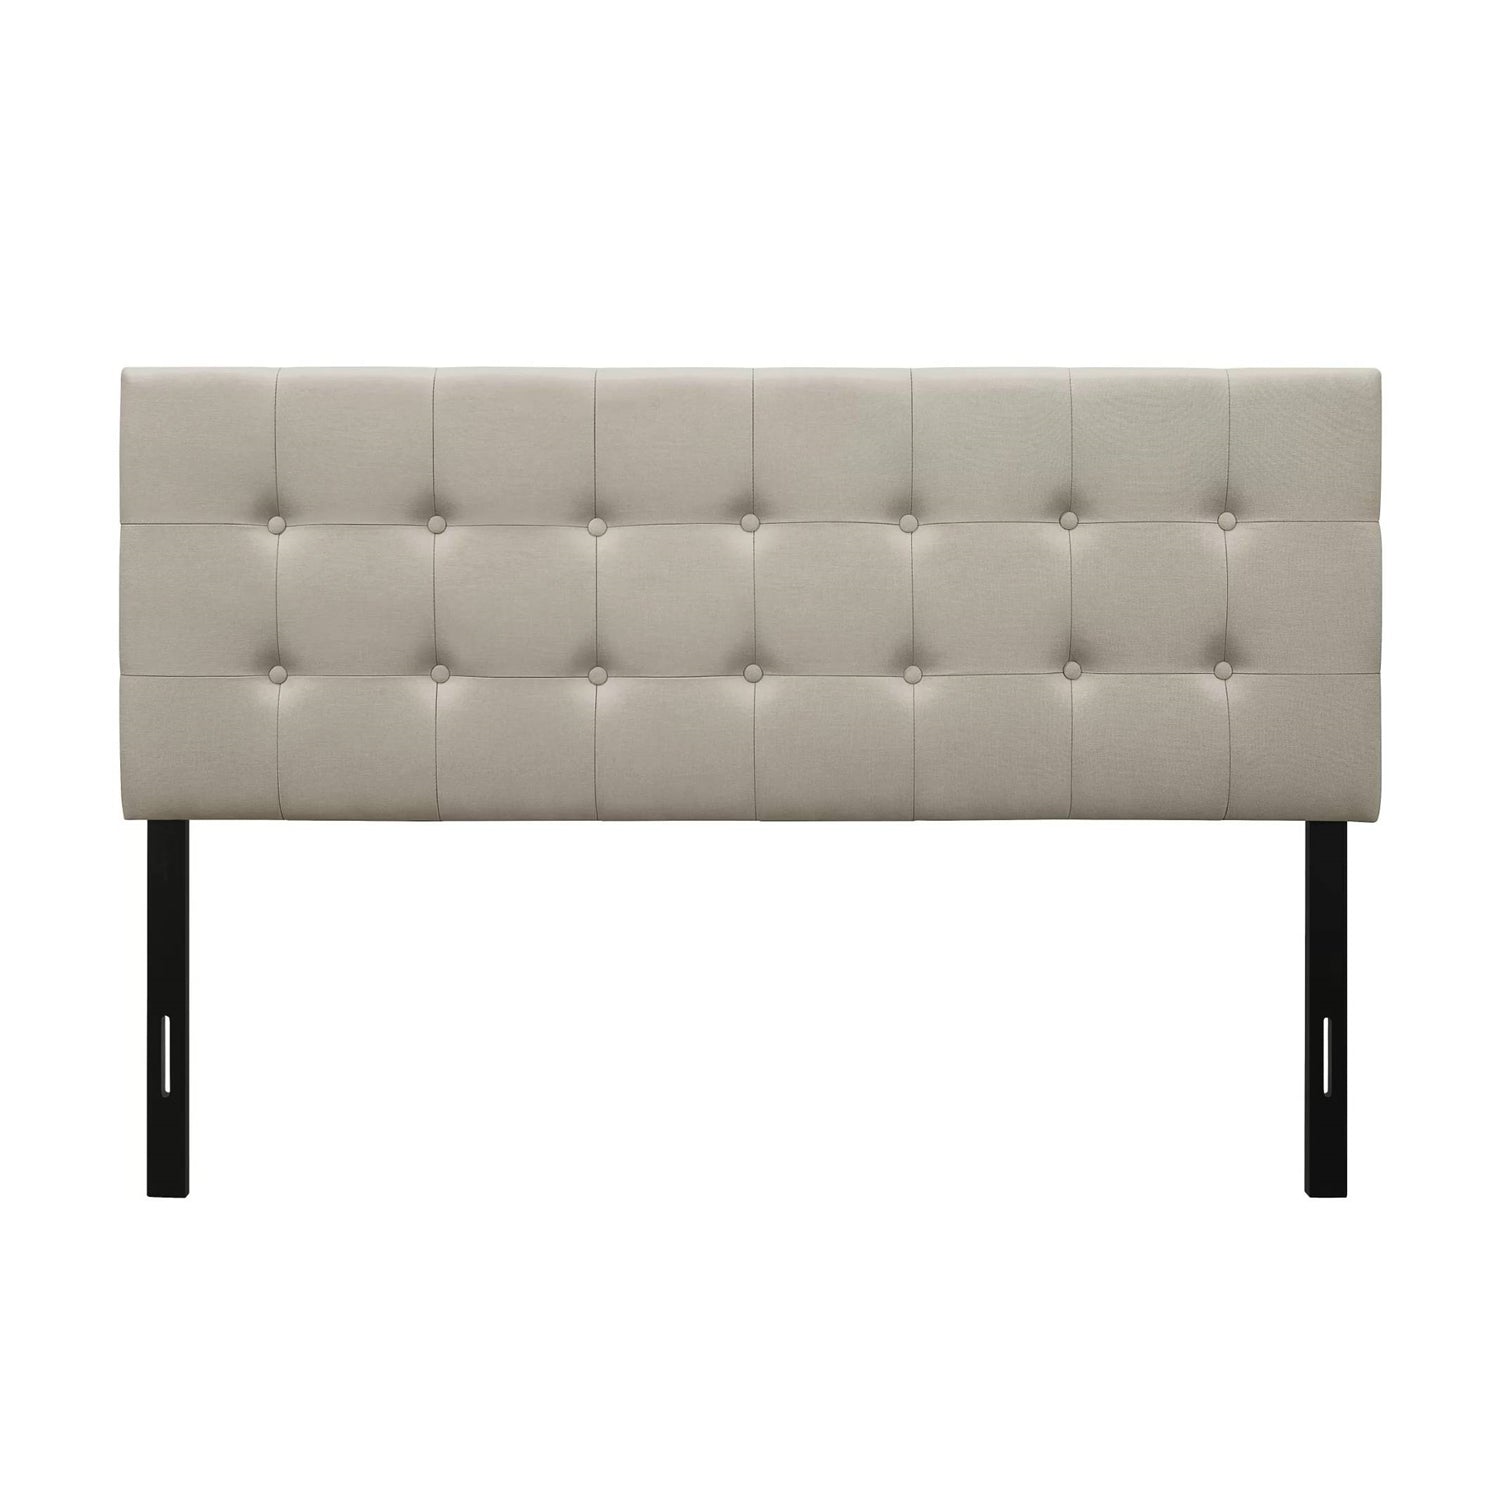 Queen Button-Tufted Headboard in Light Grey Beige Taupe Upholstered Fabric